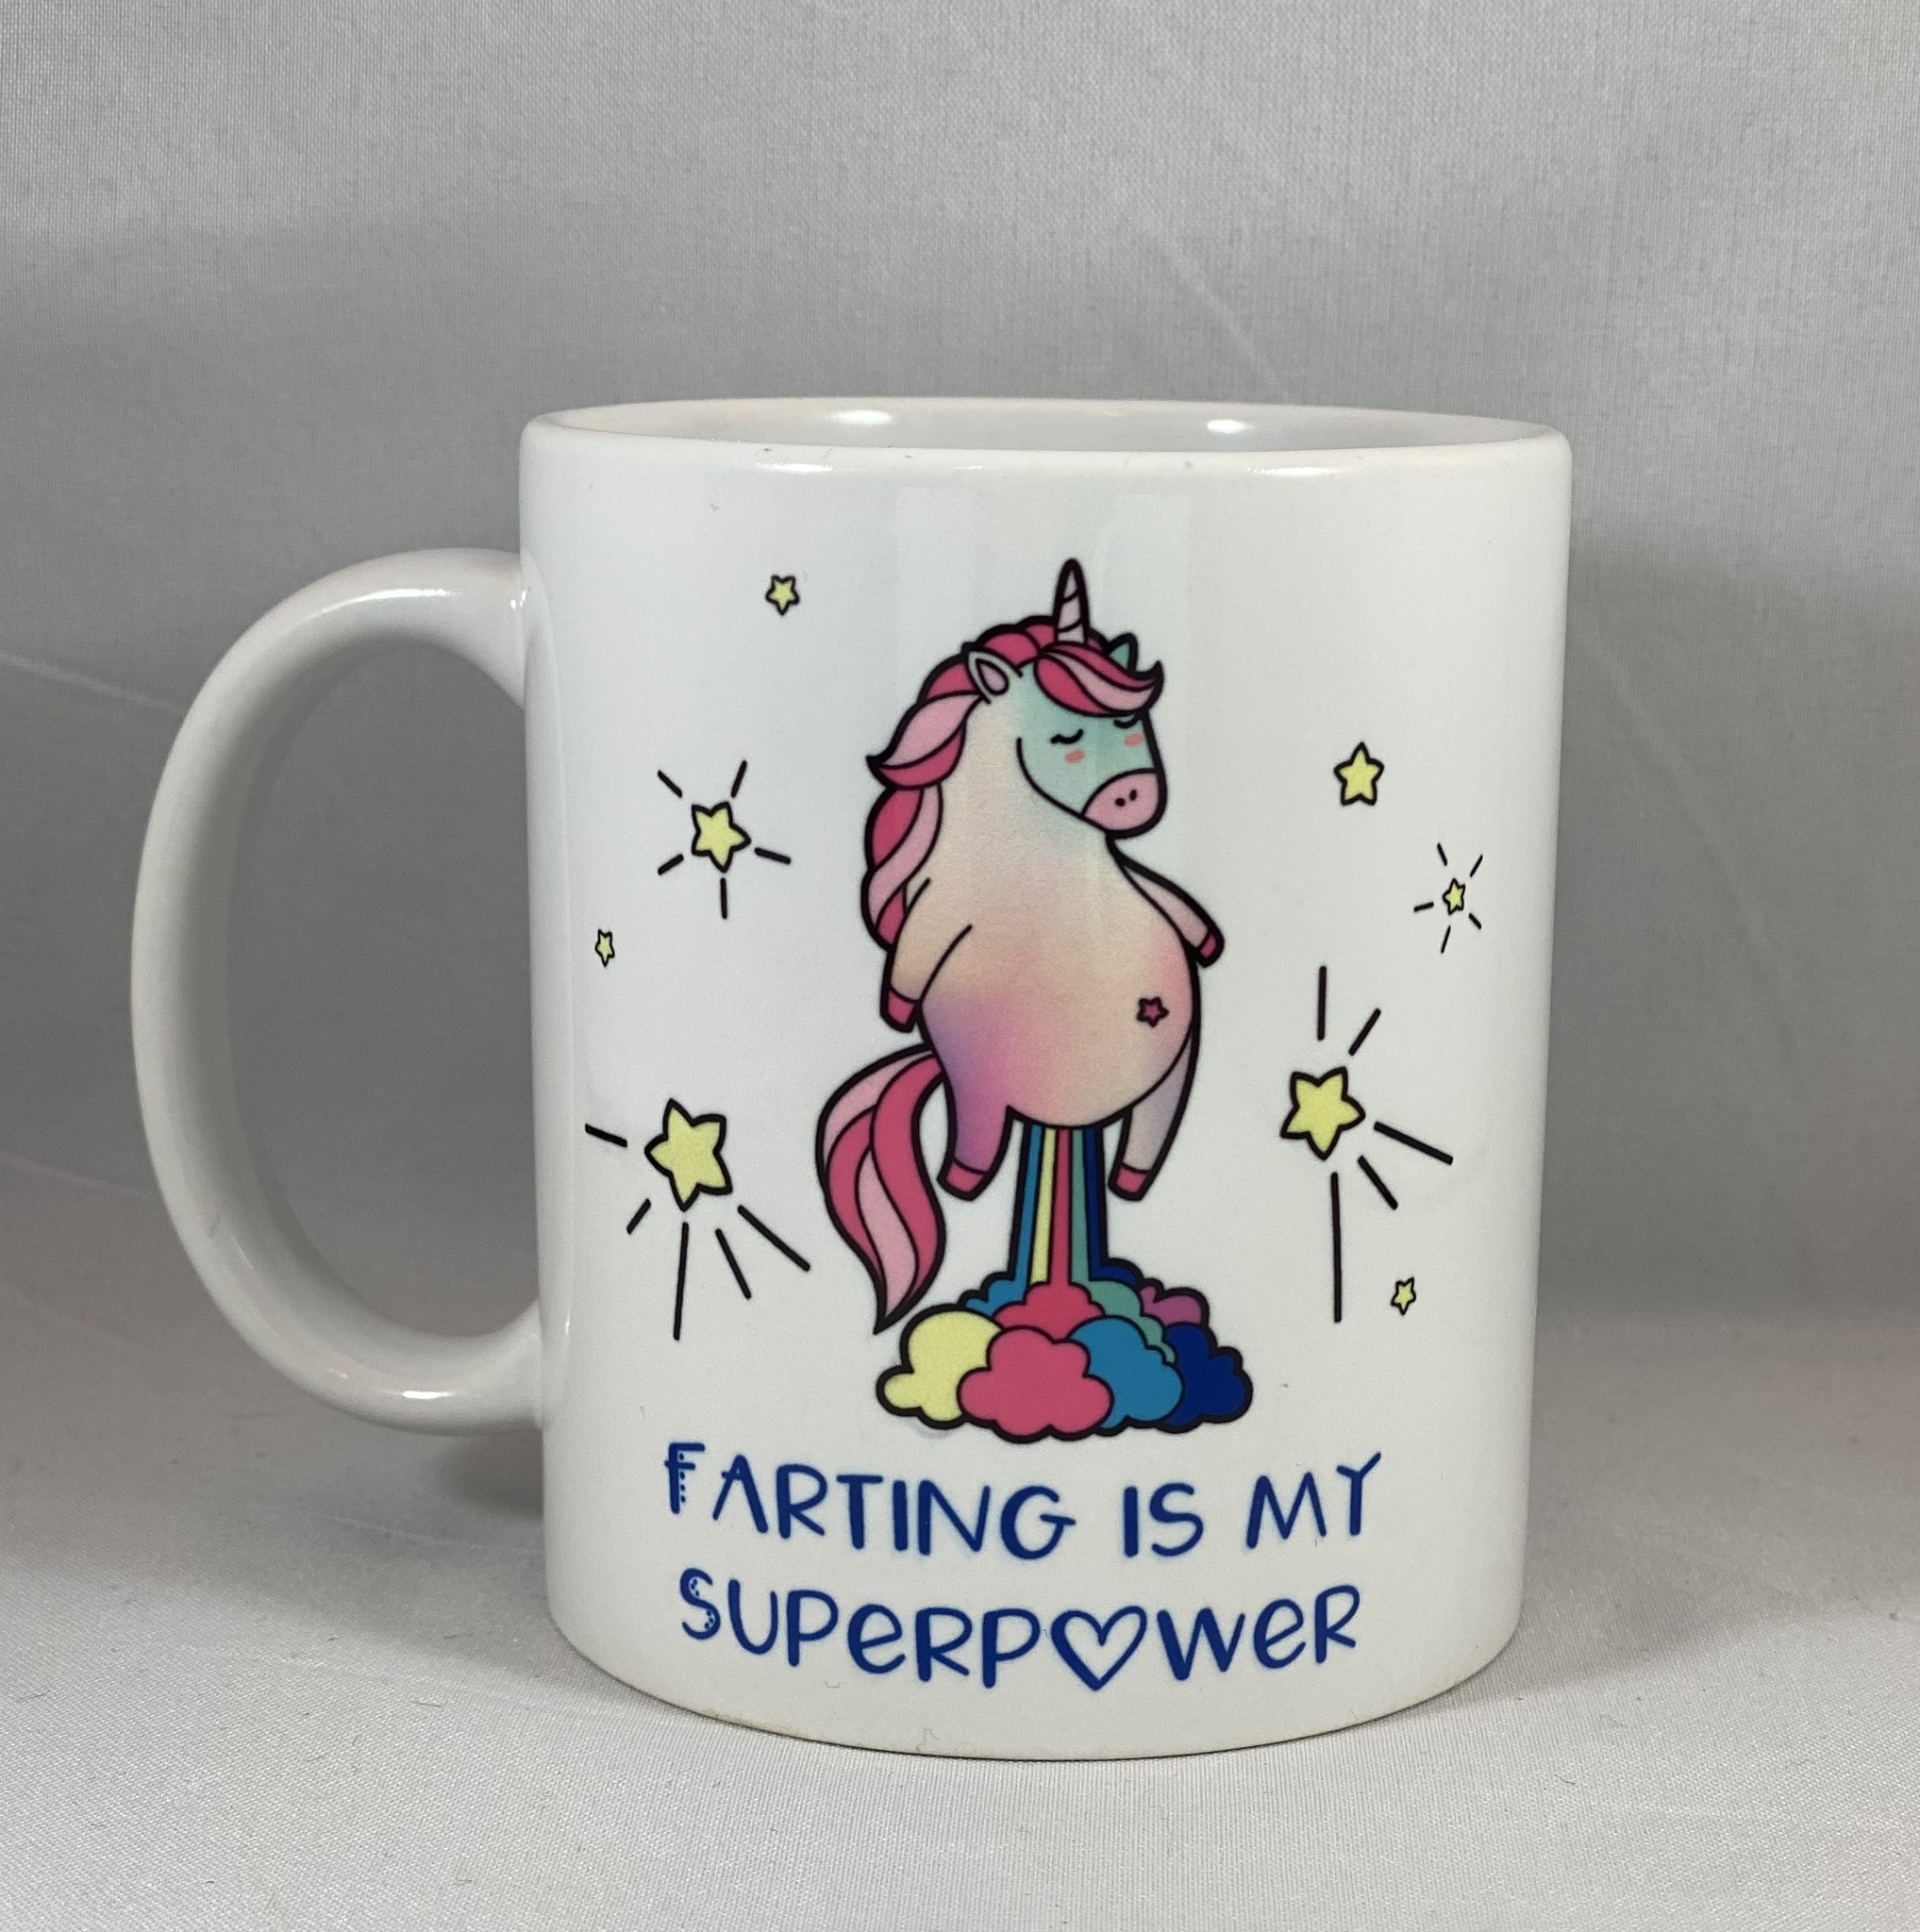 Mugg Farting is my superpower